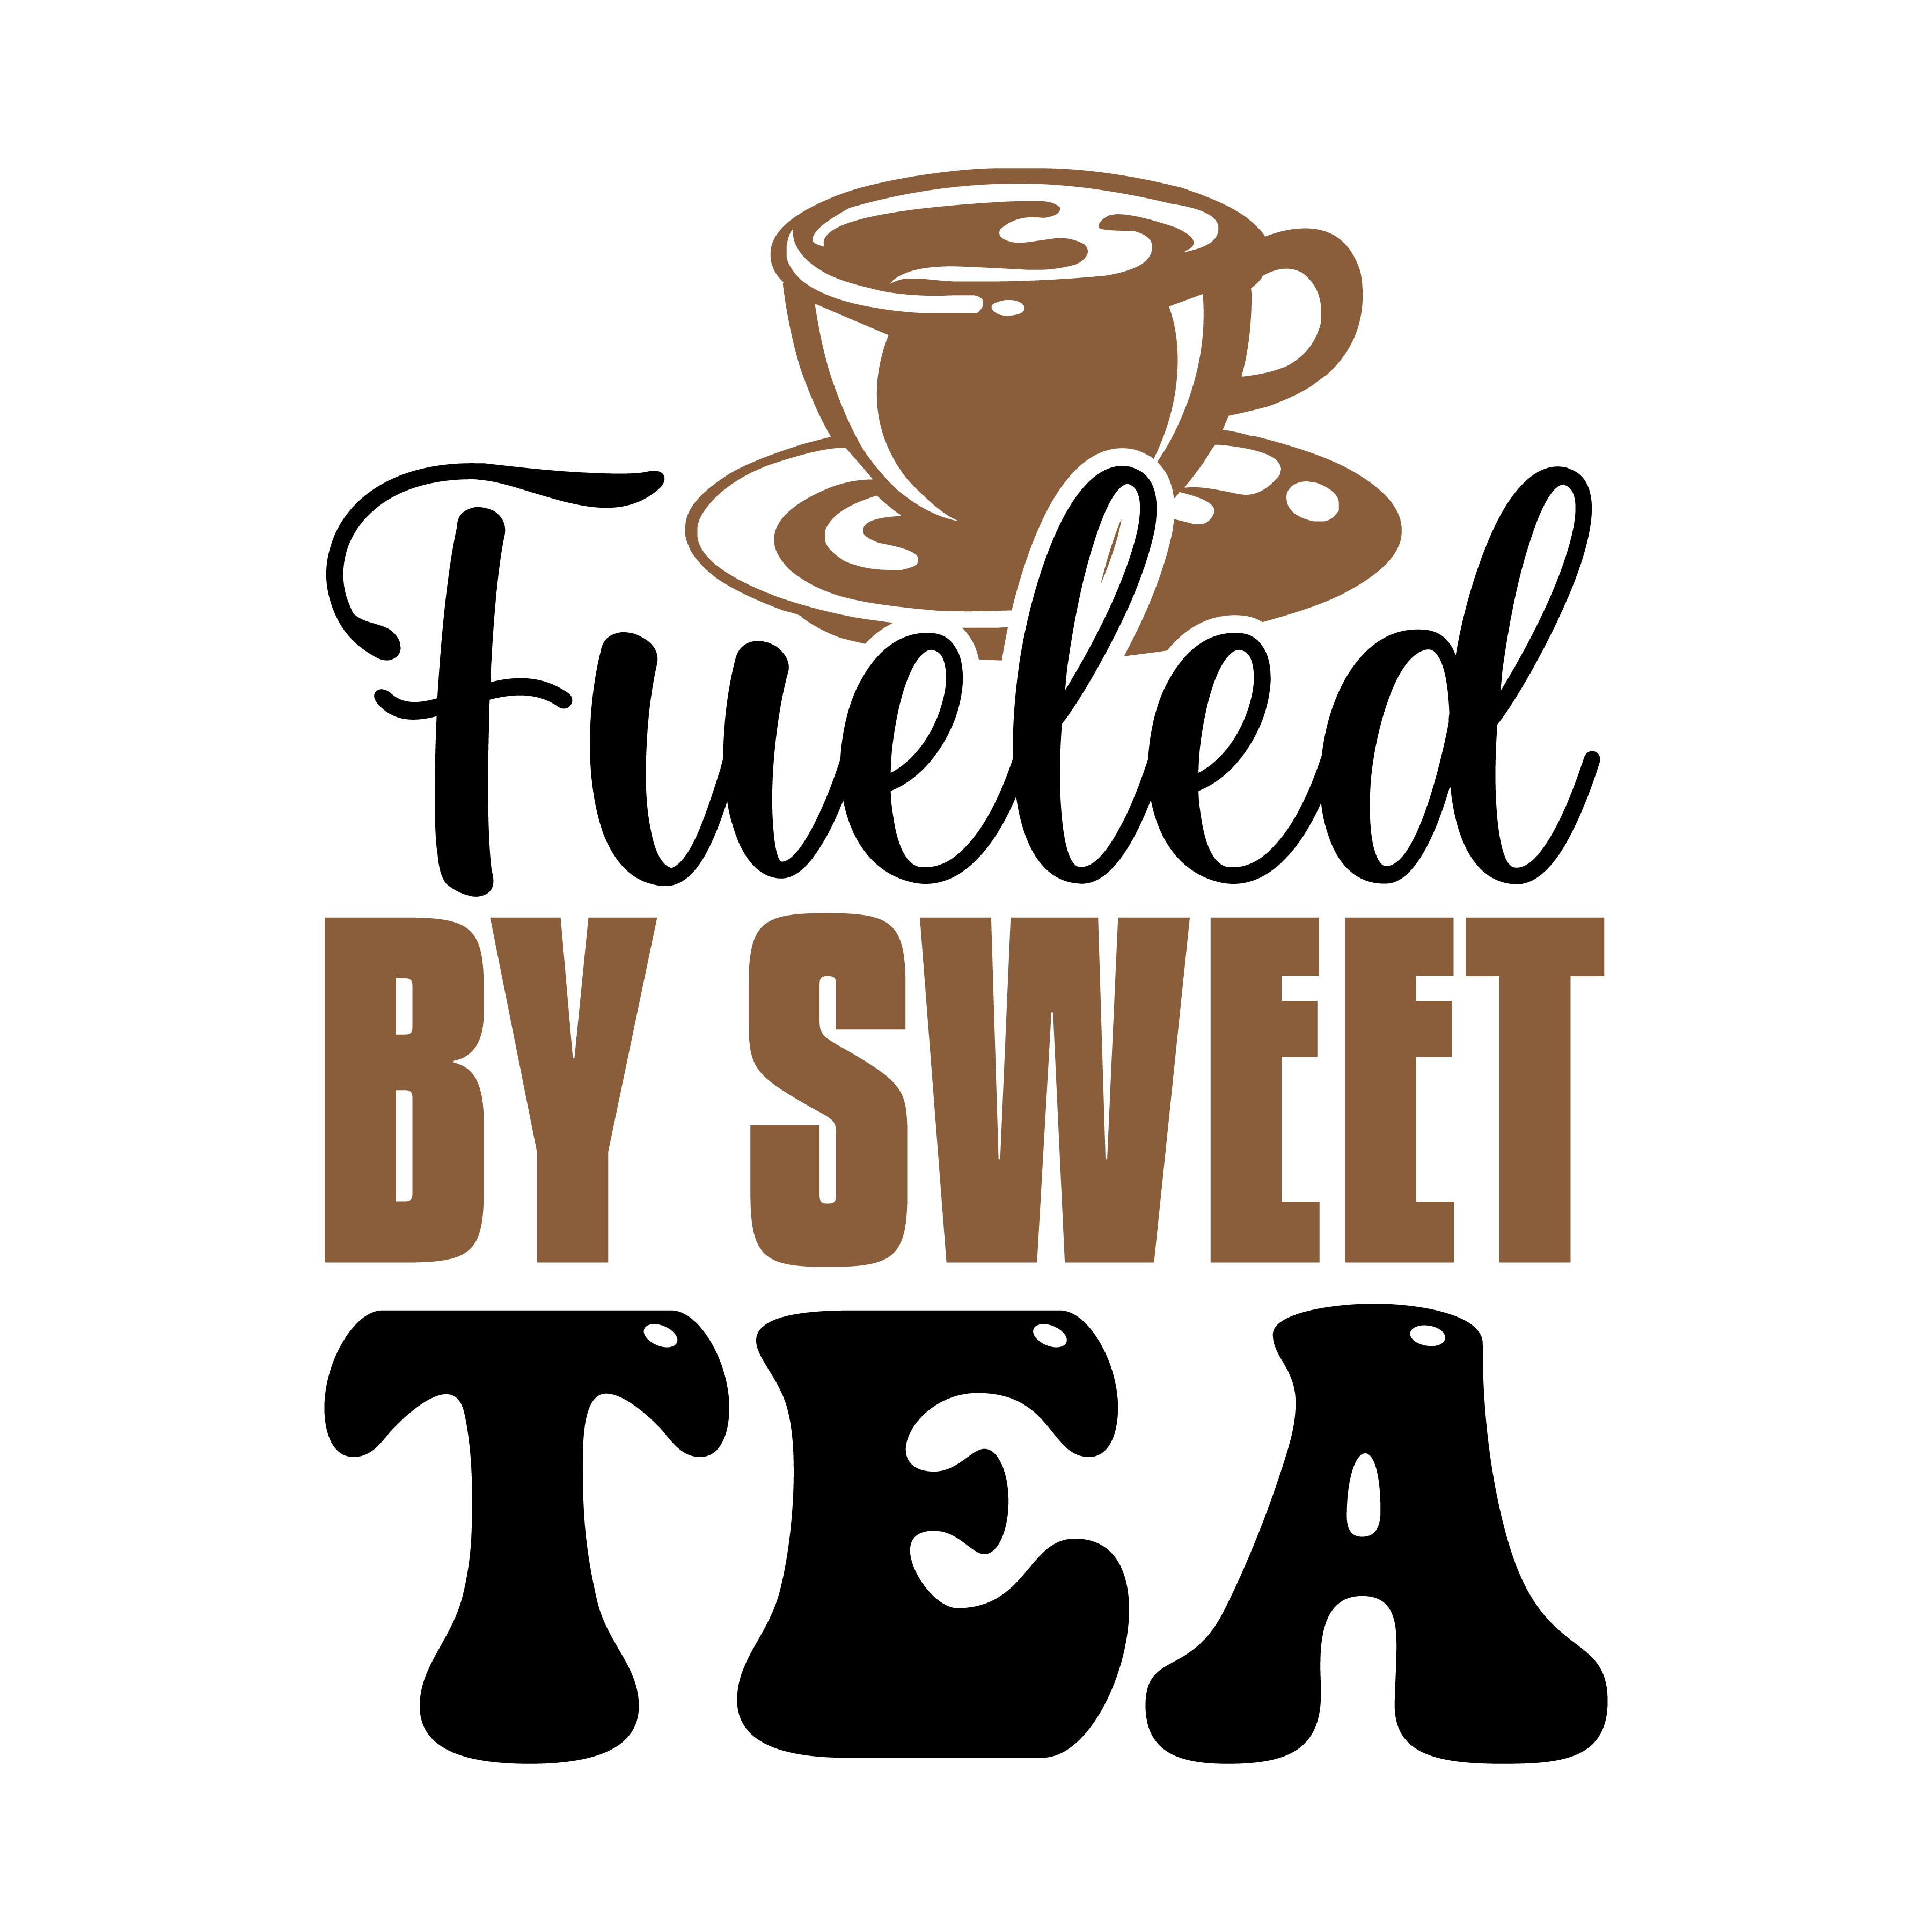 fueled by sweet tea, tea sayings, tea quotes, Cricut designs, free, clip art, svg file, template, pattern, stencil, silhouette, cut file, design space, short, funny, shirt, cup, DIY crafts and projects, embroidery